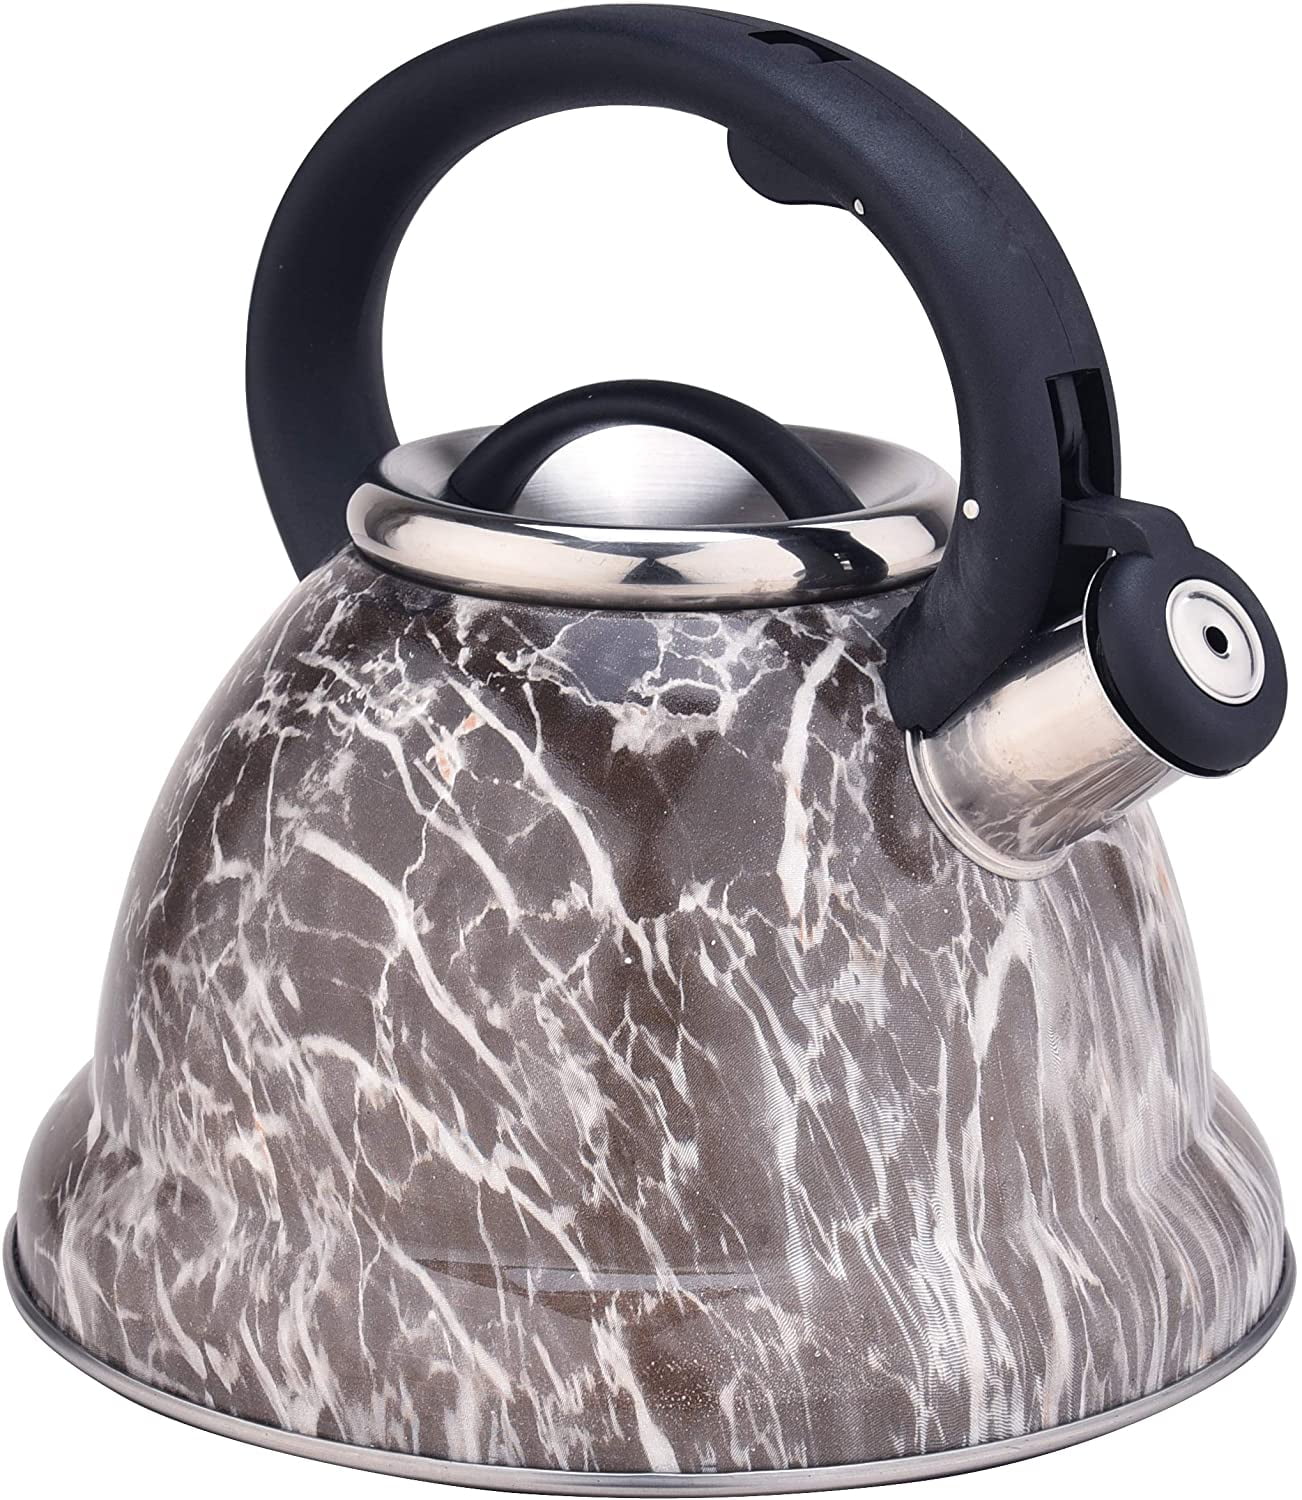 VOCHE® 3.0L METALLIC CREAM STAINLESS STEEL WHISTLING KETTLE GAS & ELECTRIC HOBS 